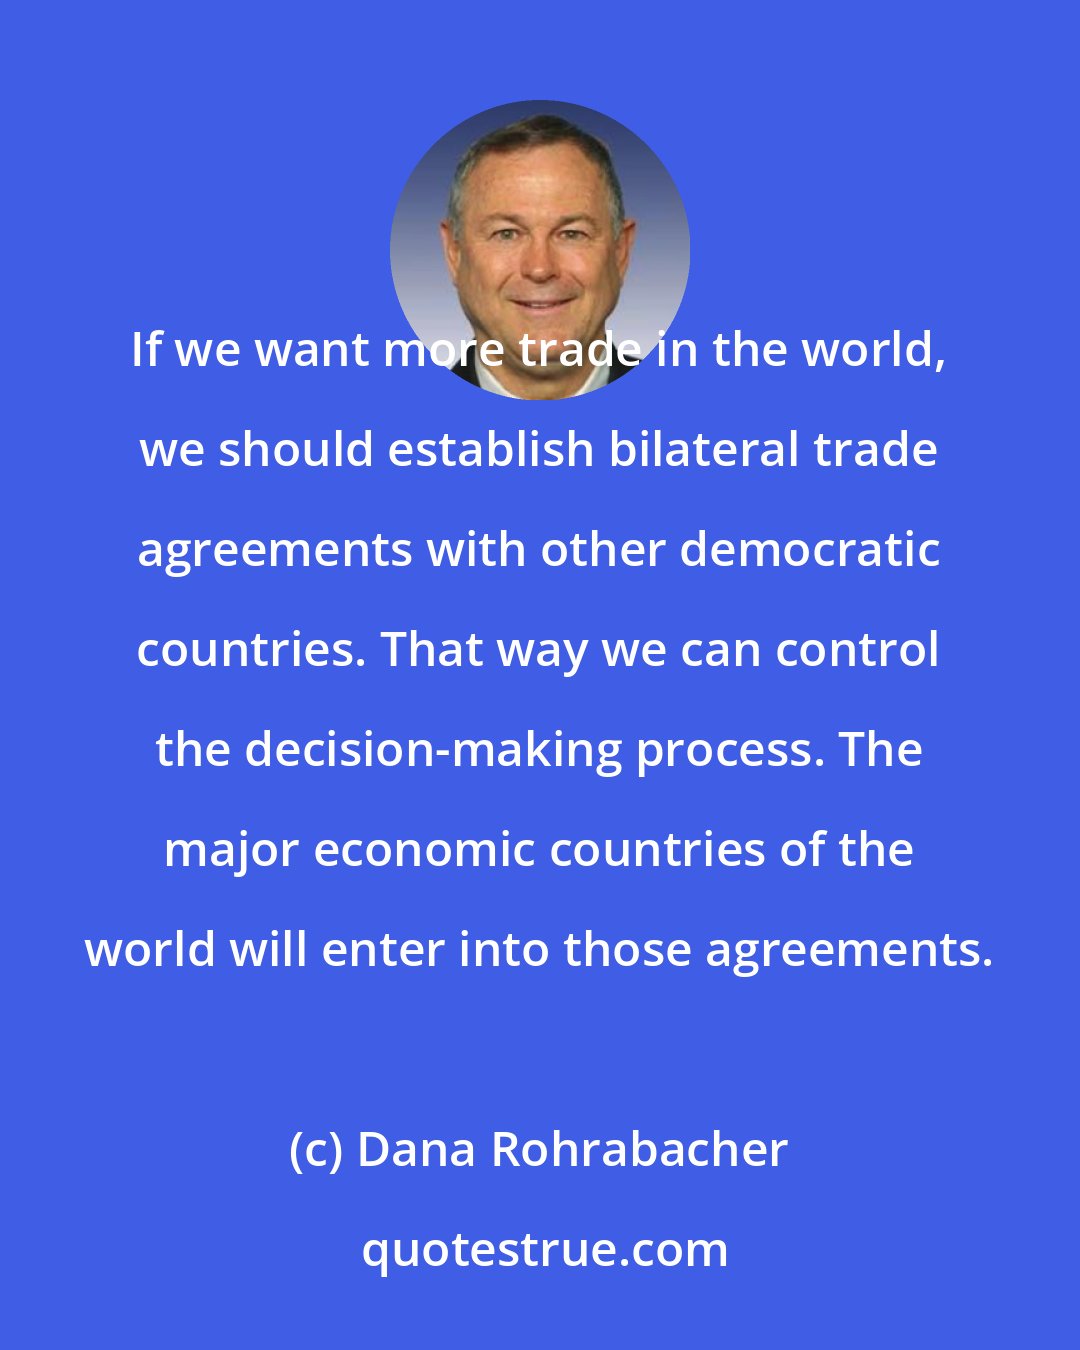 Dana Rohrabacher: If we want more trade in the world, we should establish bilateral trade agreements with other democratic countries. That way we can control the decision-making process. The major economic countries of the world will enter into those agreements.